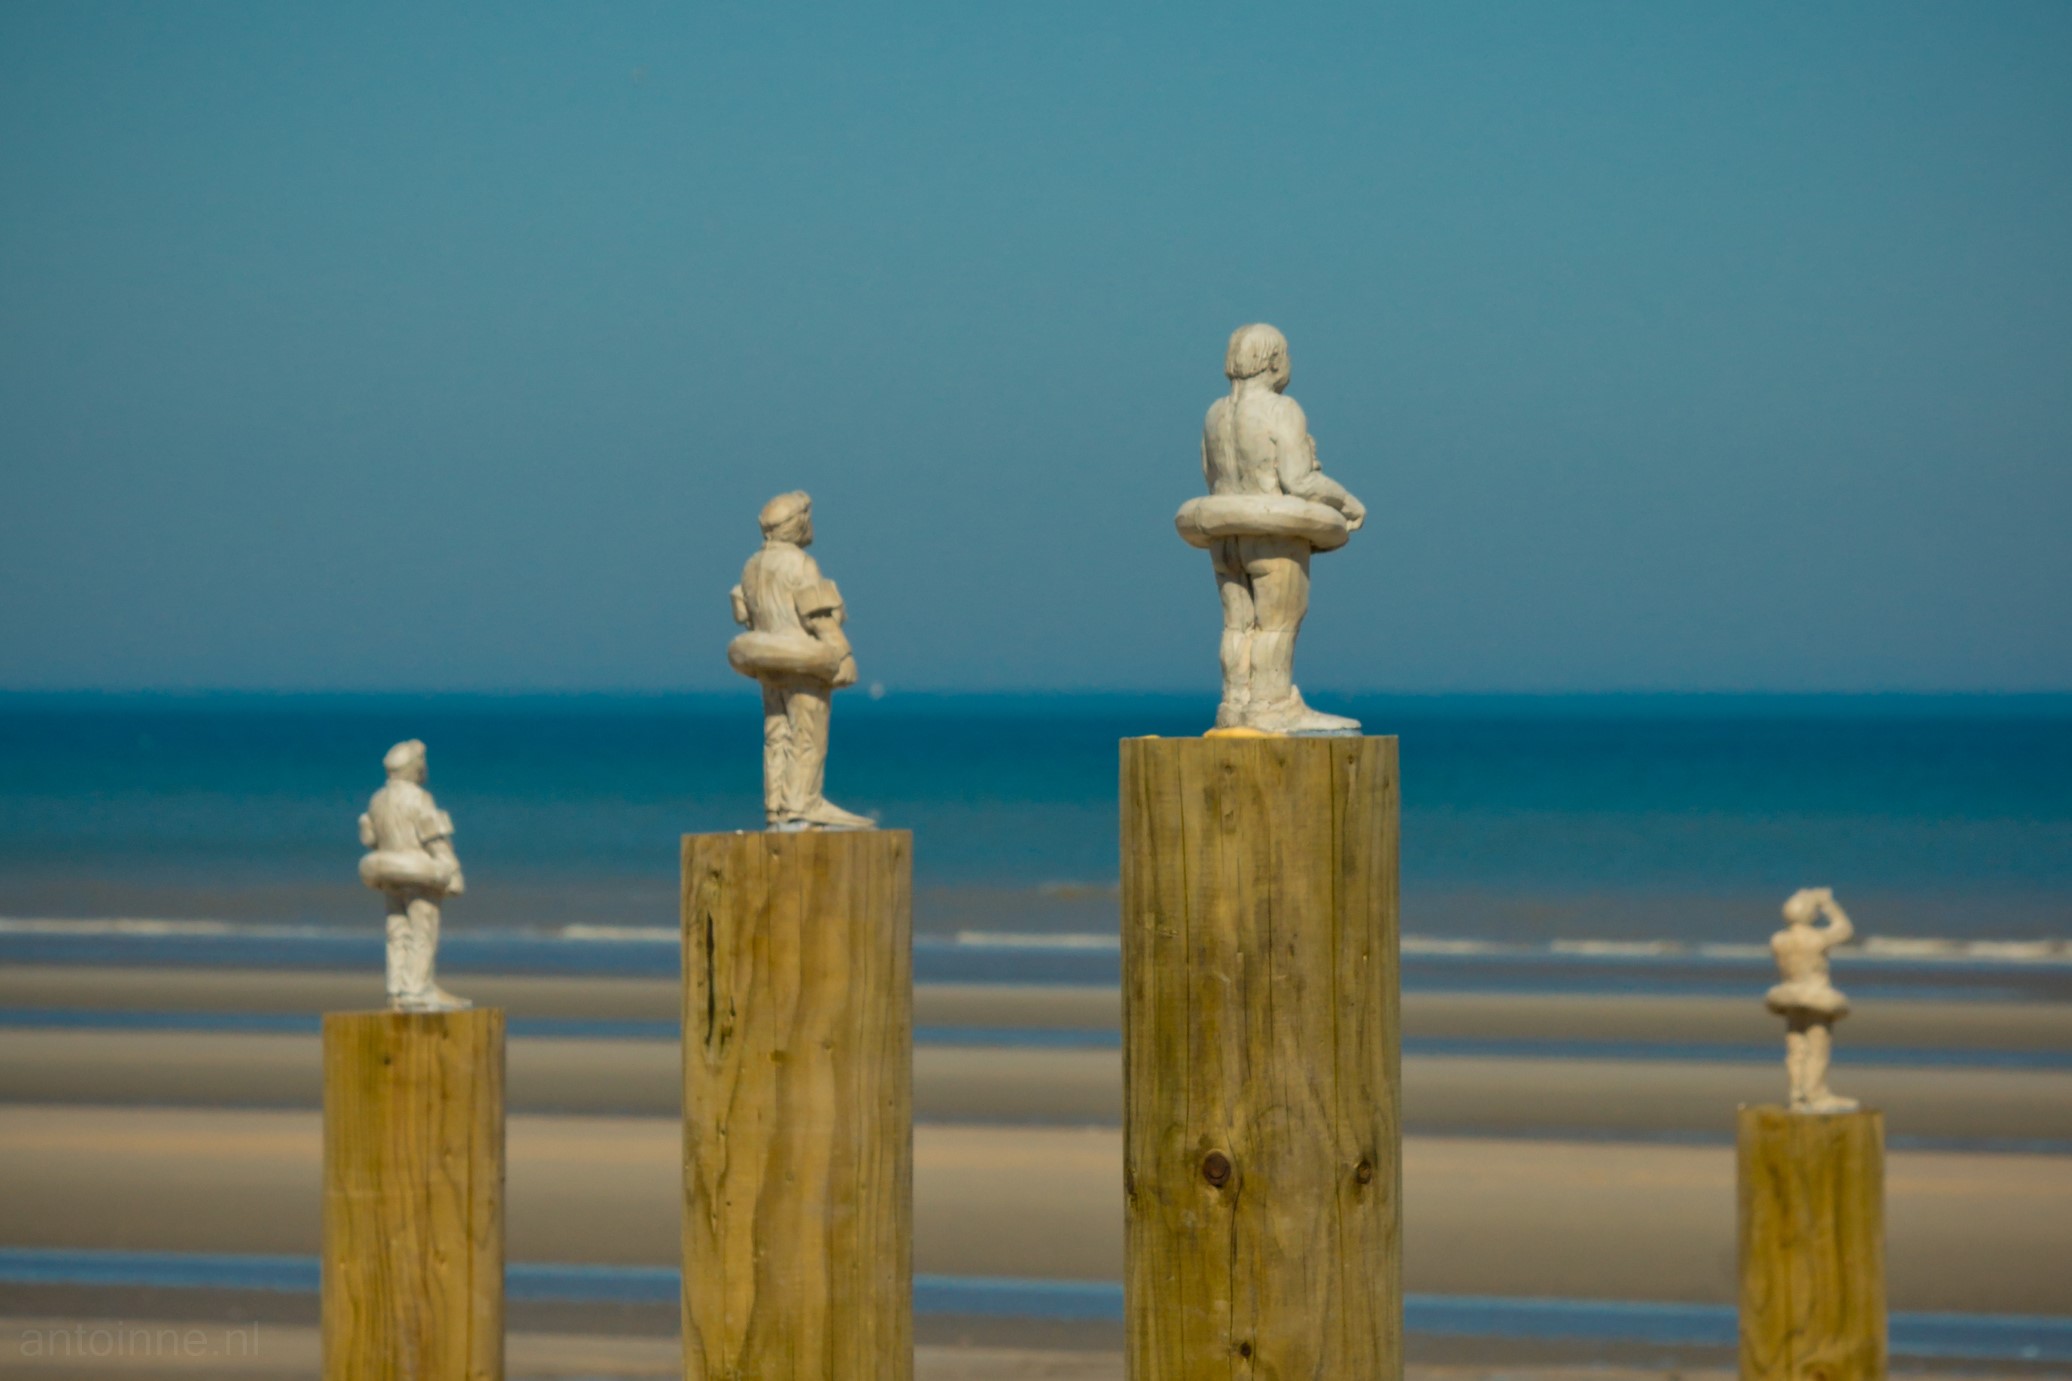 The photo shows a detail of an artwork called "Waiting for climate change" by Isaac Cordal. Small cement sculptures are watching the ocean on top of wooden poles. They are prepared with their mobile phones and diving equipment for an emergency. The artwork was on display in De Panne and was part of the BEAUFORT04 art trail on the Belgian coast in 2012.